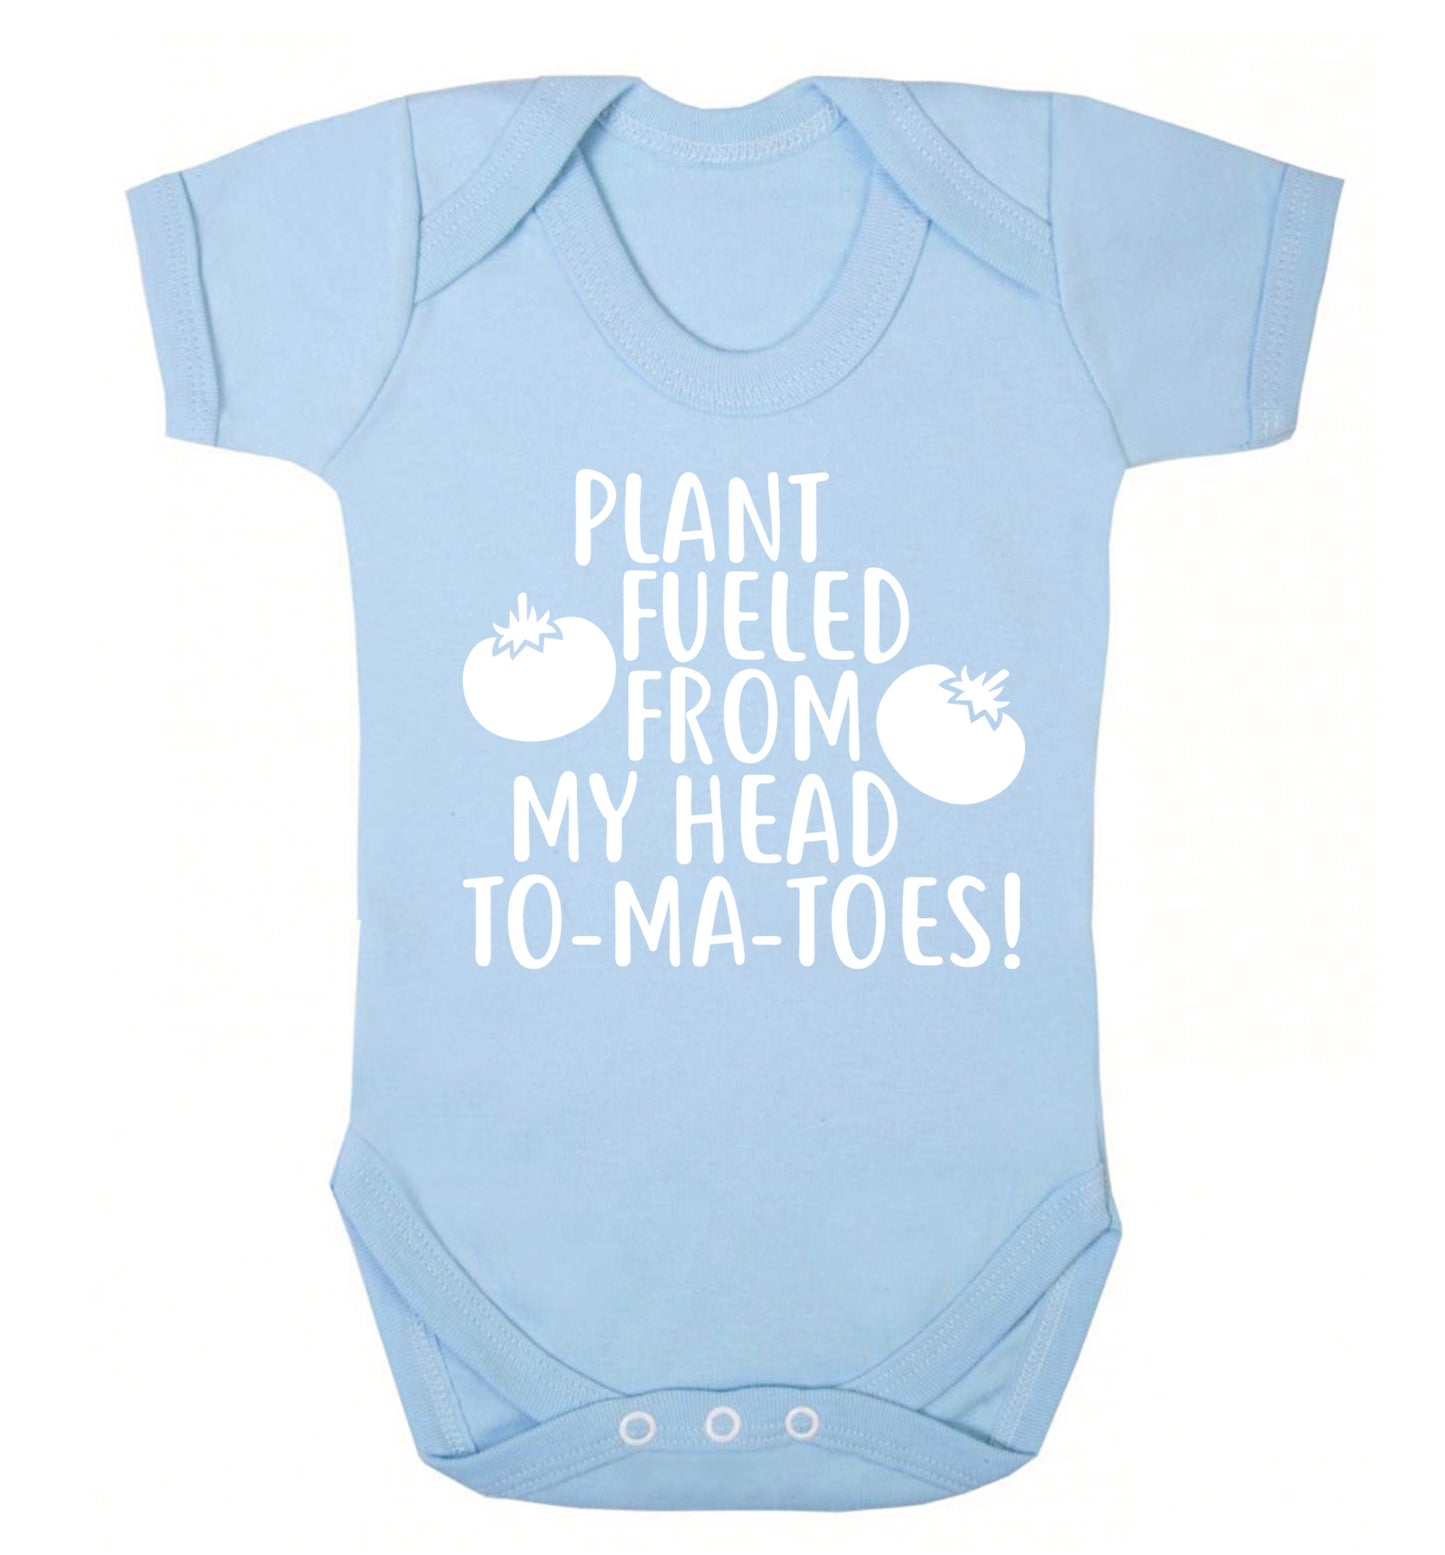 Plant fueled from my head to-ma-toes Baby Vest pale blue 18-24 months